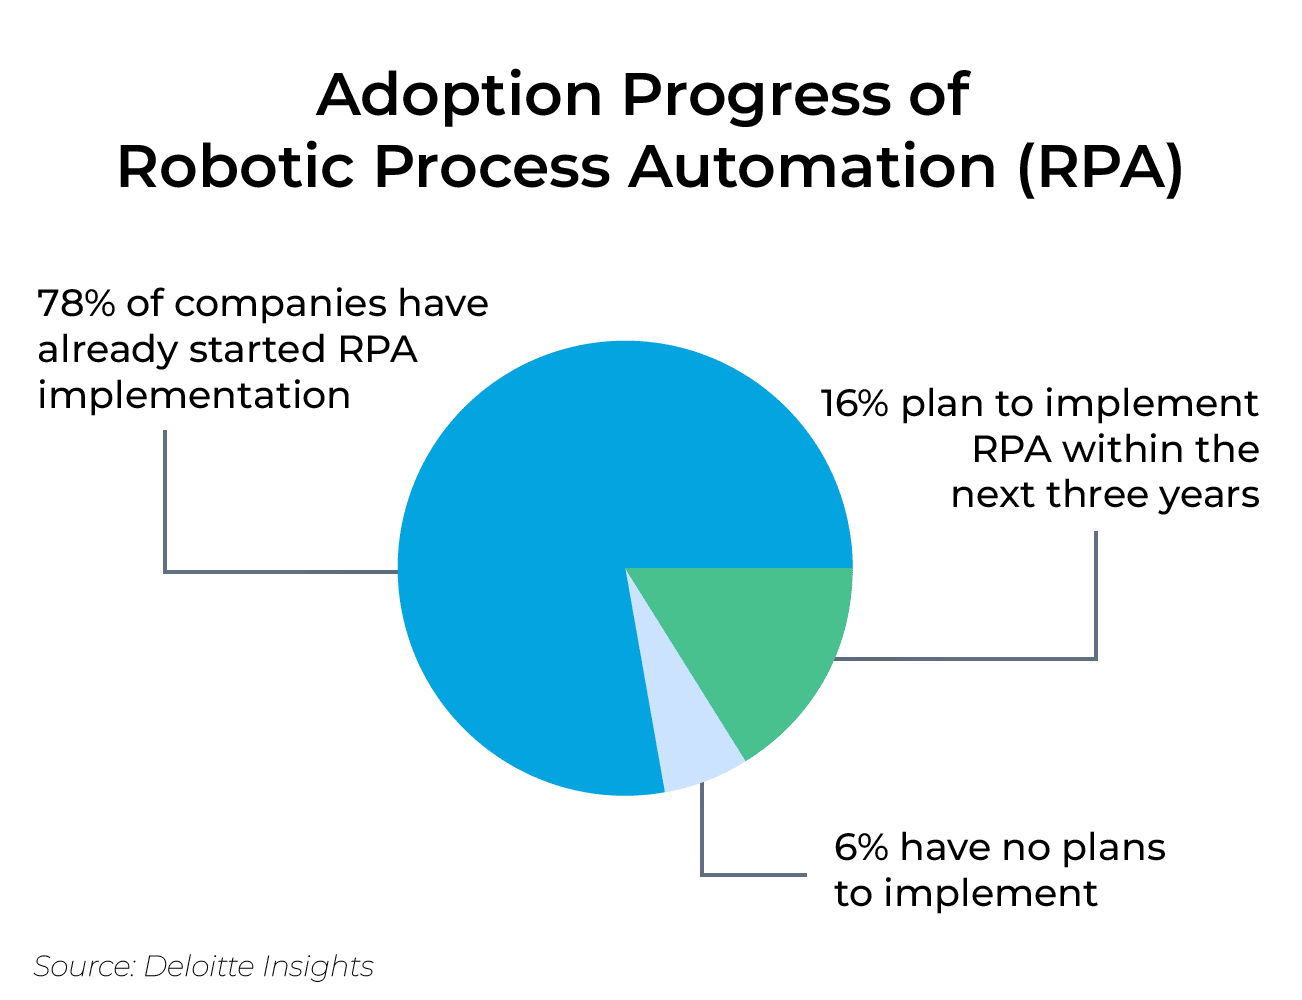 Adoption Process of RPA. According to a Deloitte Institute study, 78% of companies have already started RPA implementation, and 16% plan on implementation within the next 3 years.